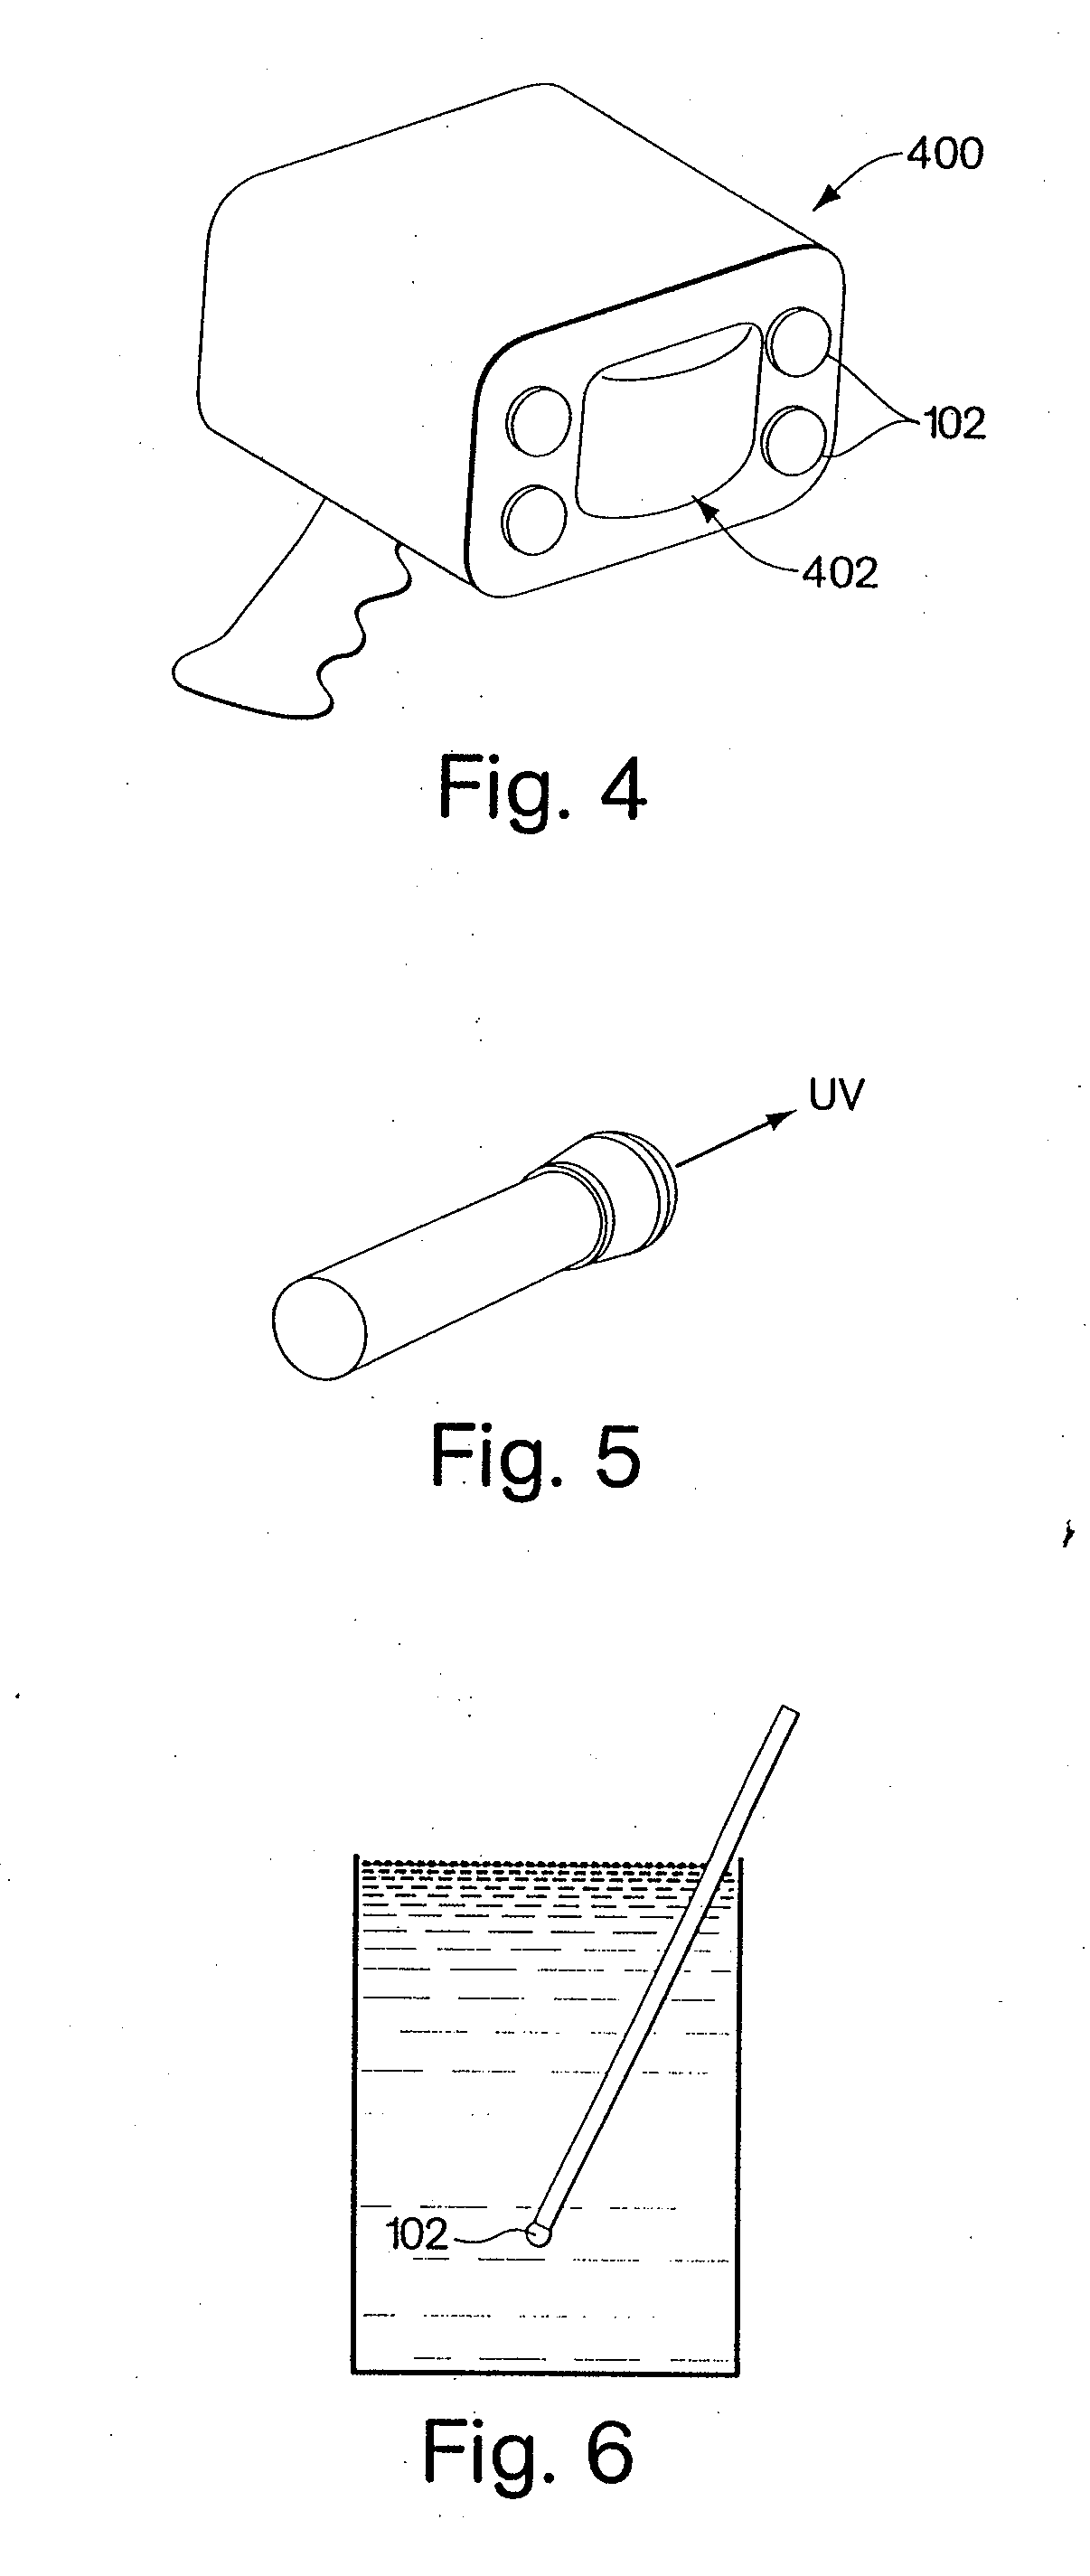 Ultraviolet light emitting diode systems and methods